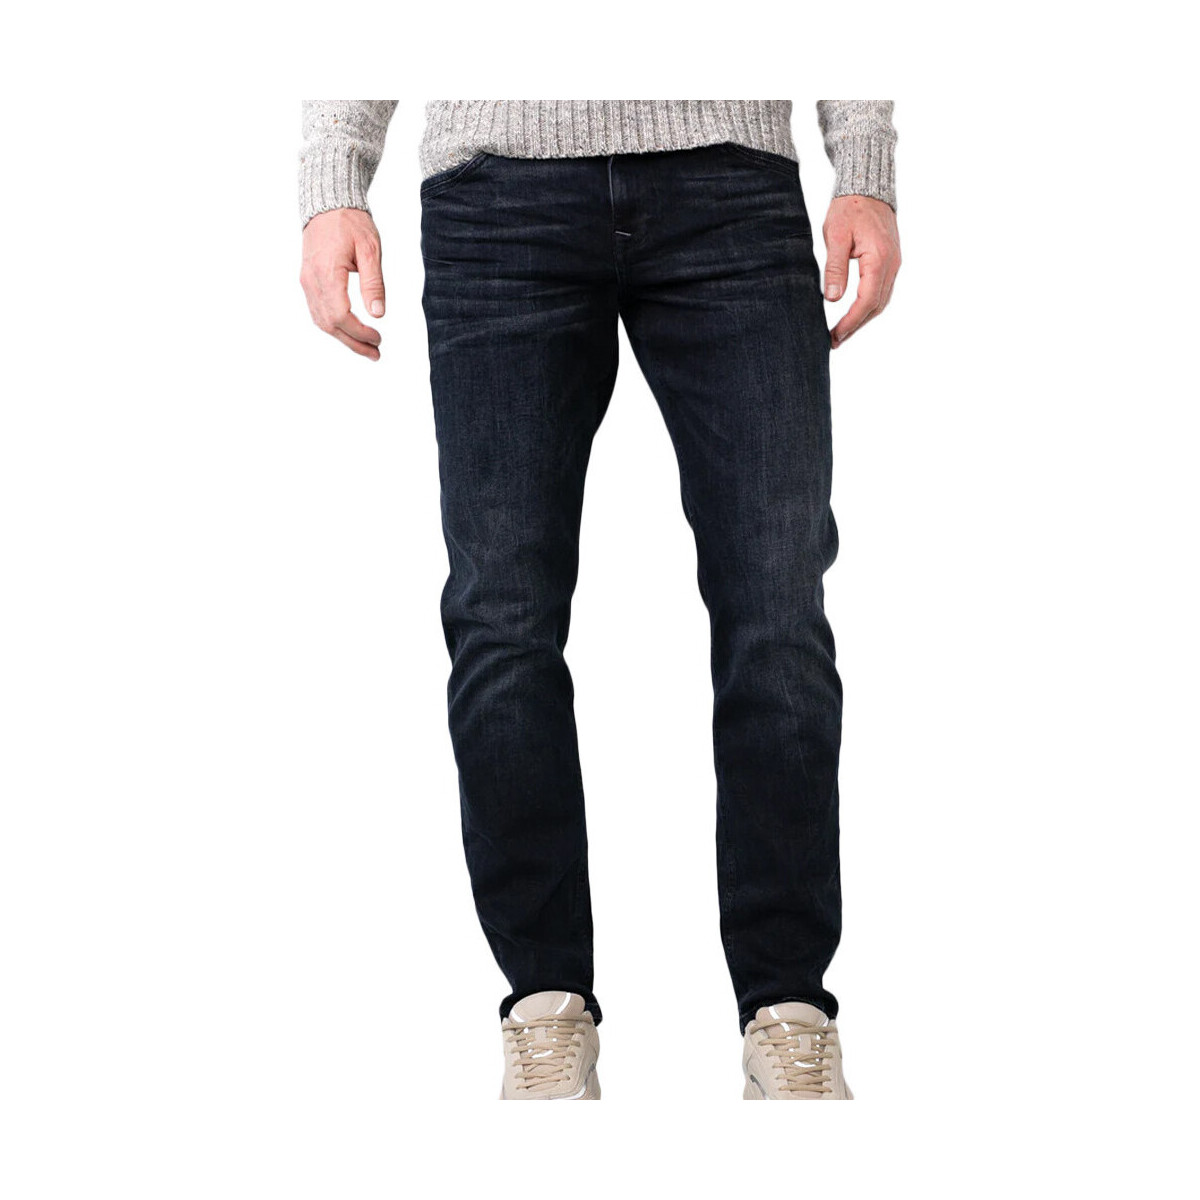 Vêtements Homme Tommy Jeans Essential Perforated Reporter Τσάντα Ώμου SEAHAM-TRACK Bleu